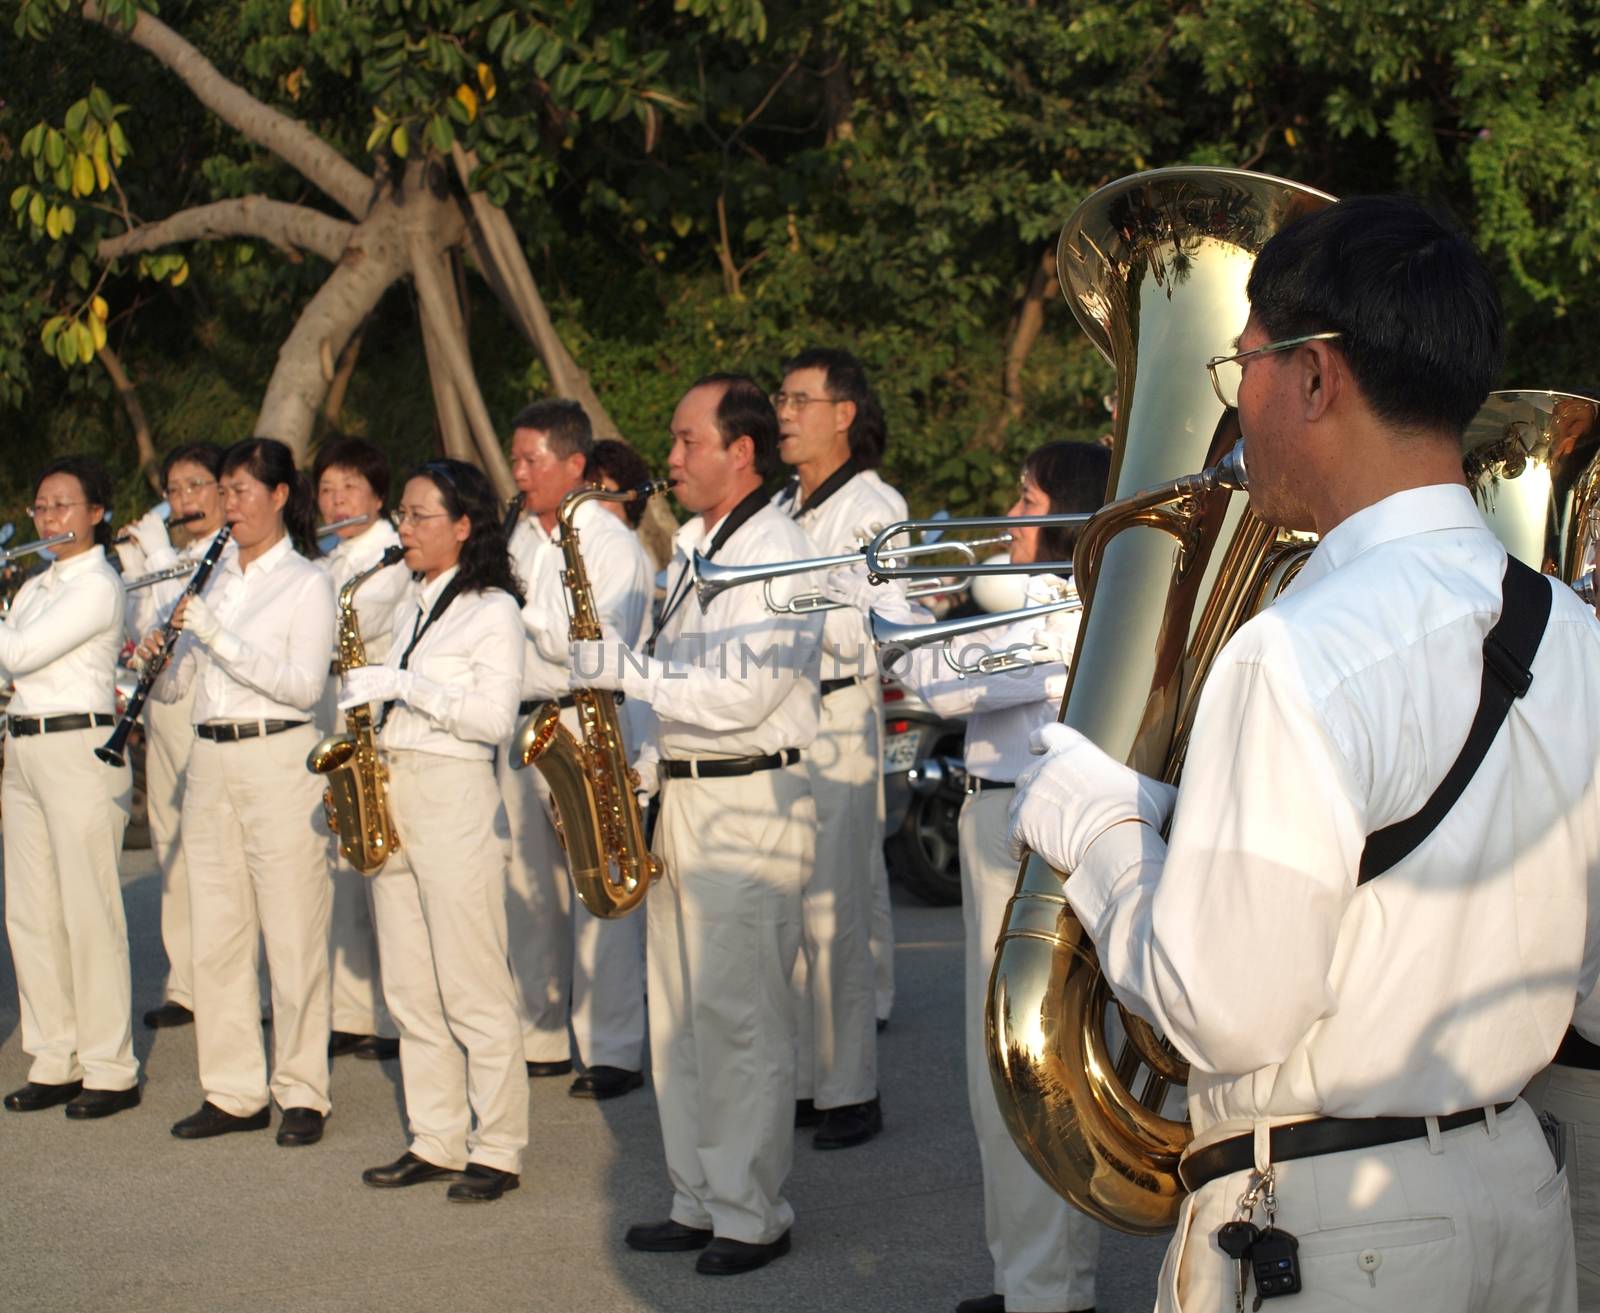 Marching Band in Taiwan Plays in a Park by shiyali